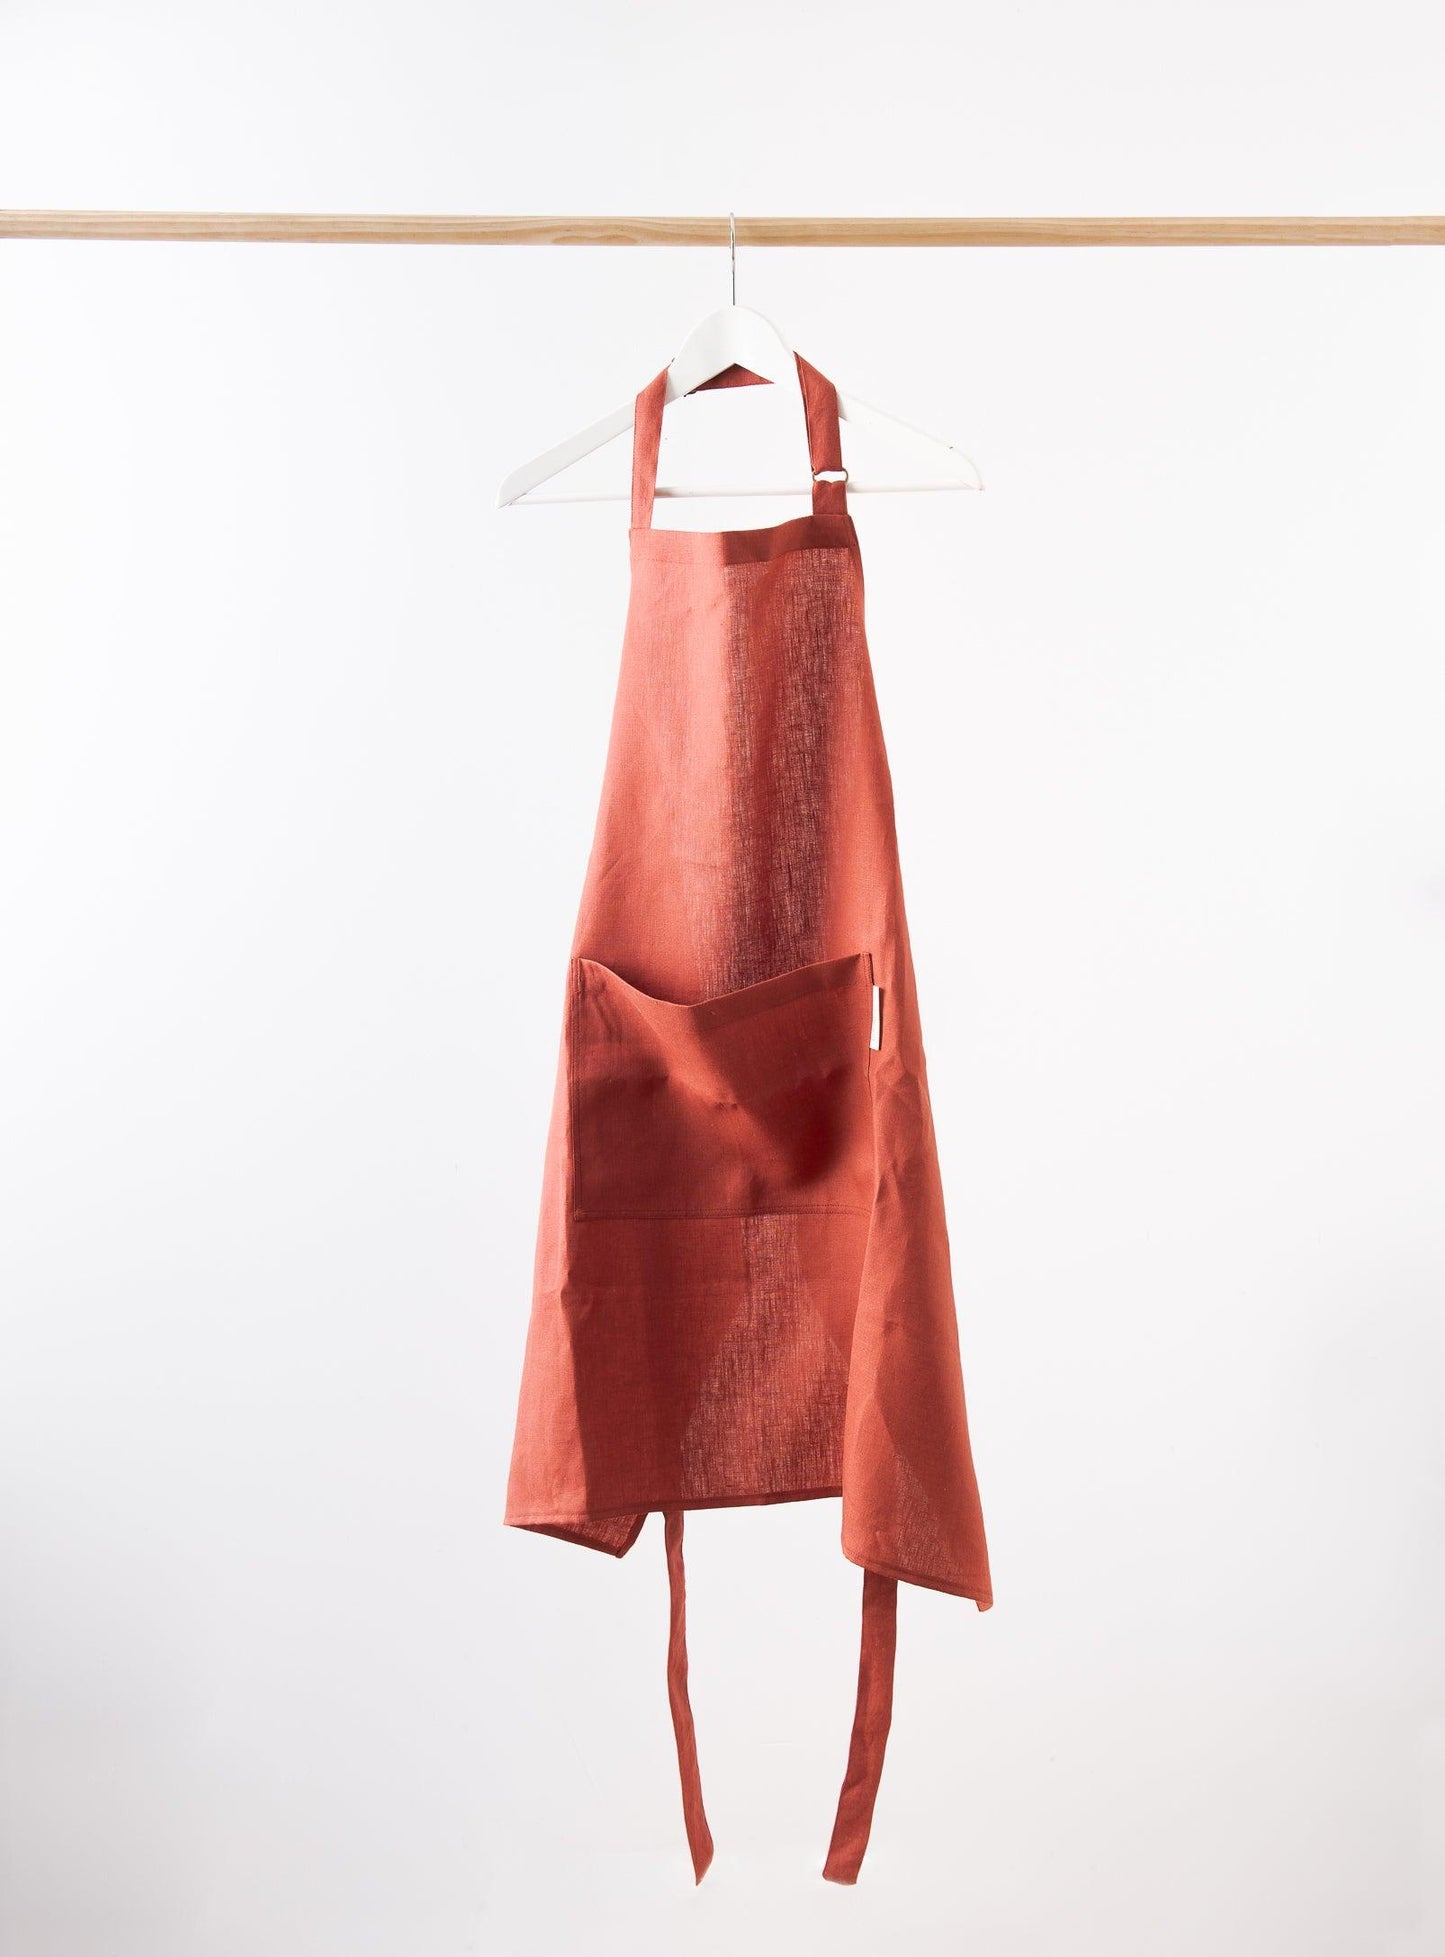 a red apron hung on a wooden hanger